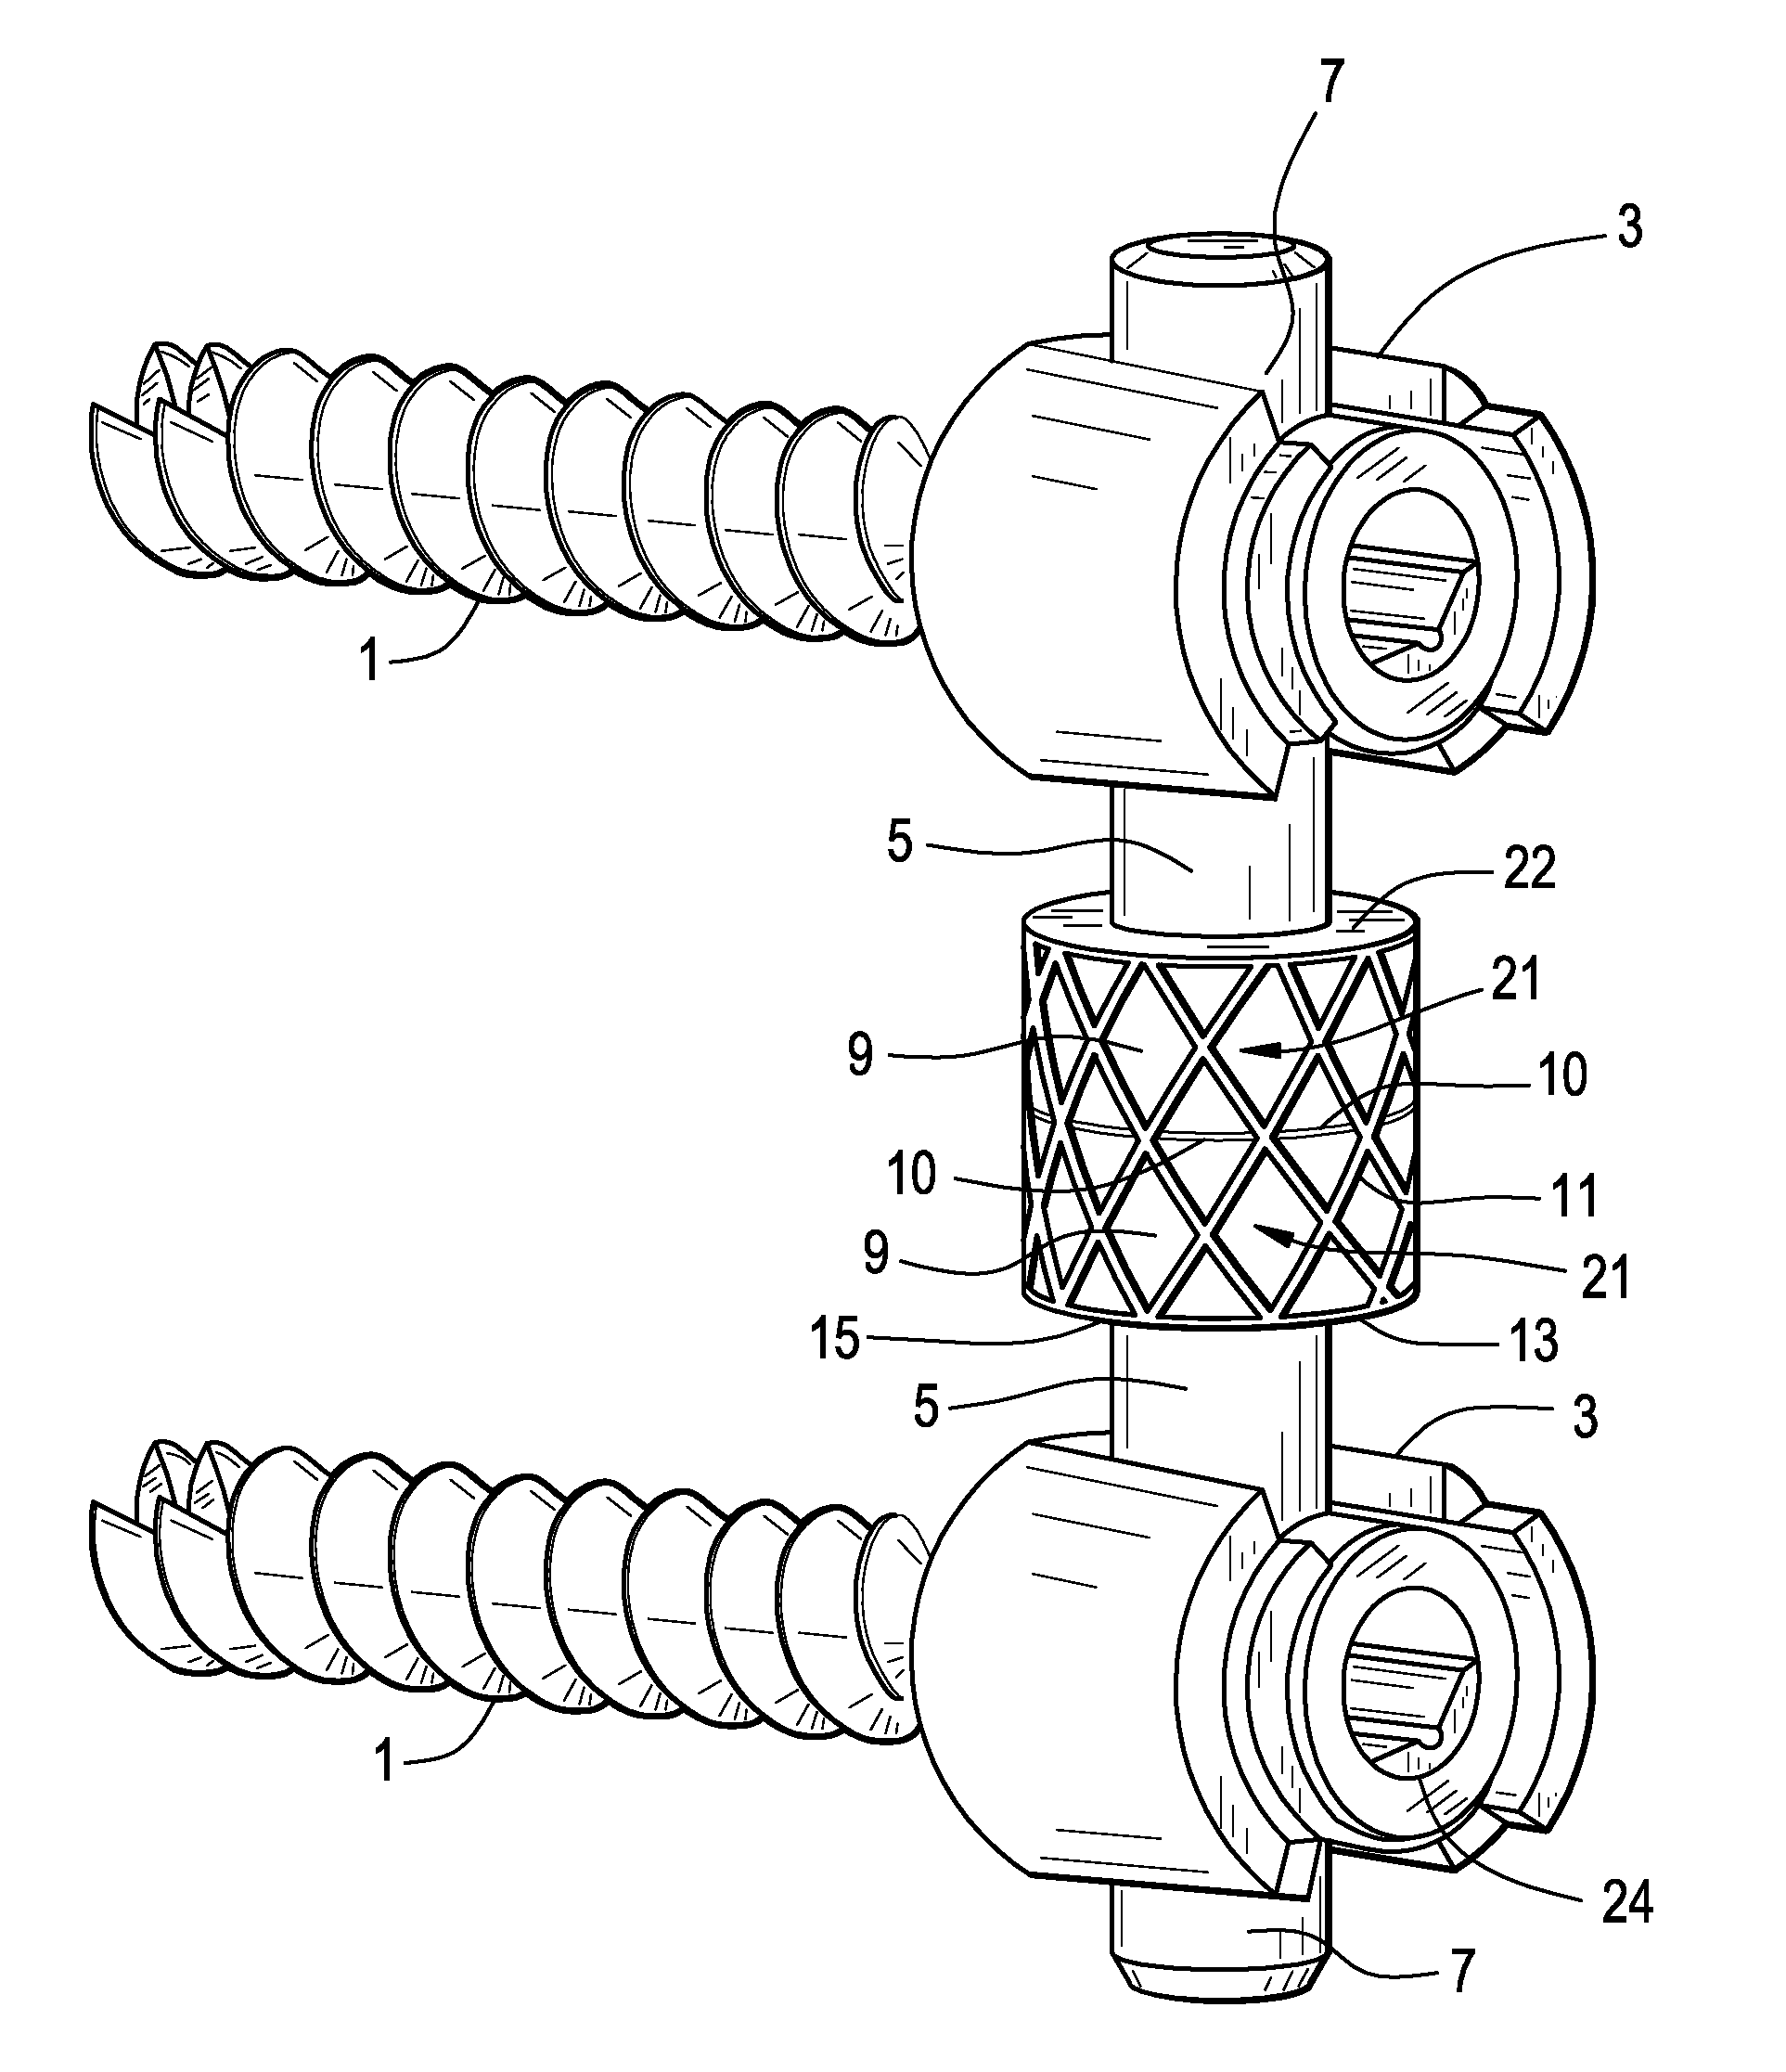 Posterior Dynamic Stabilization System With Flexible Ligament